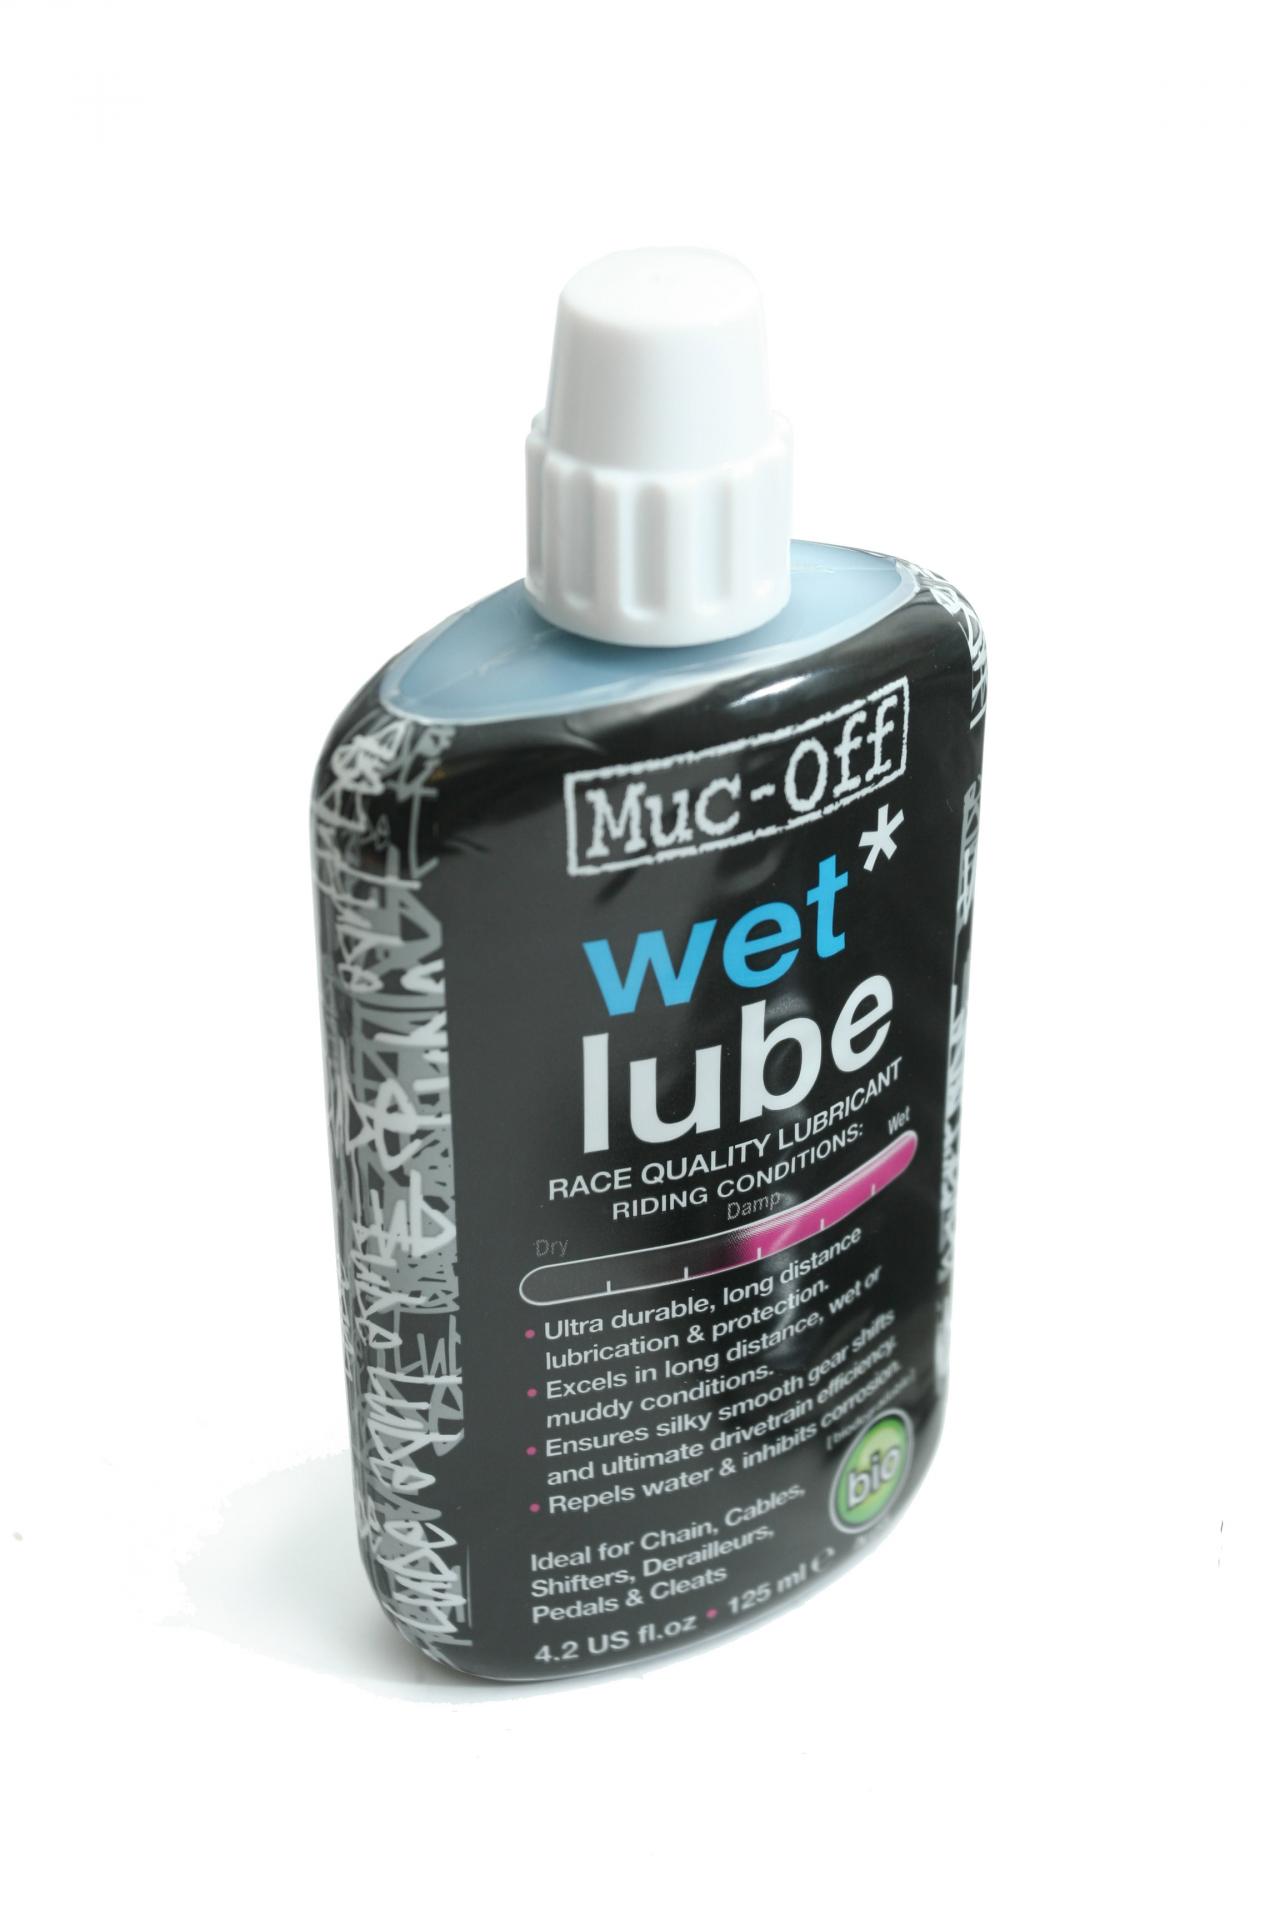 Muc-Off launches new refill versions of lubricants - Products - BikeBiz